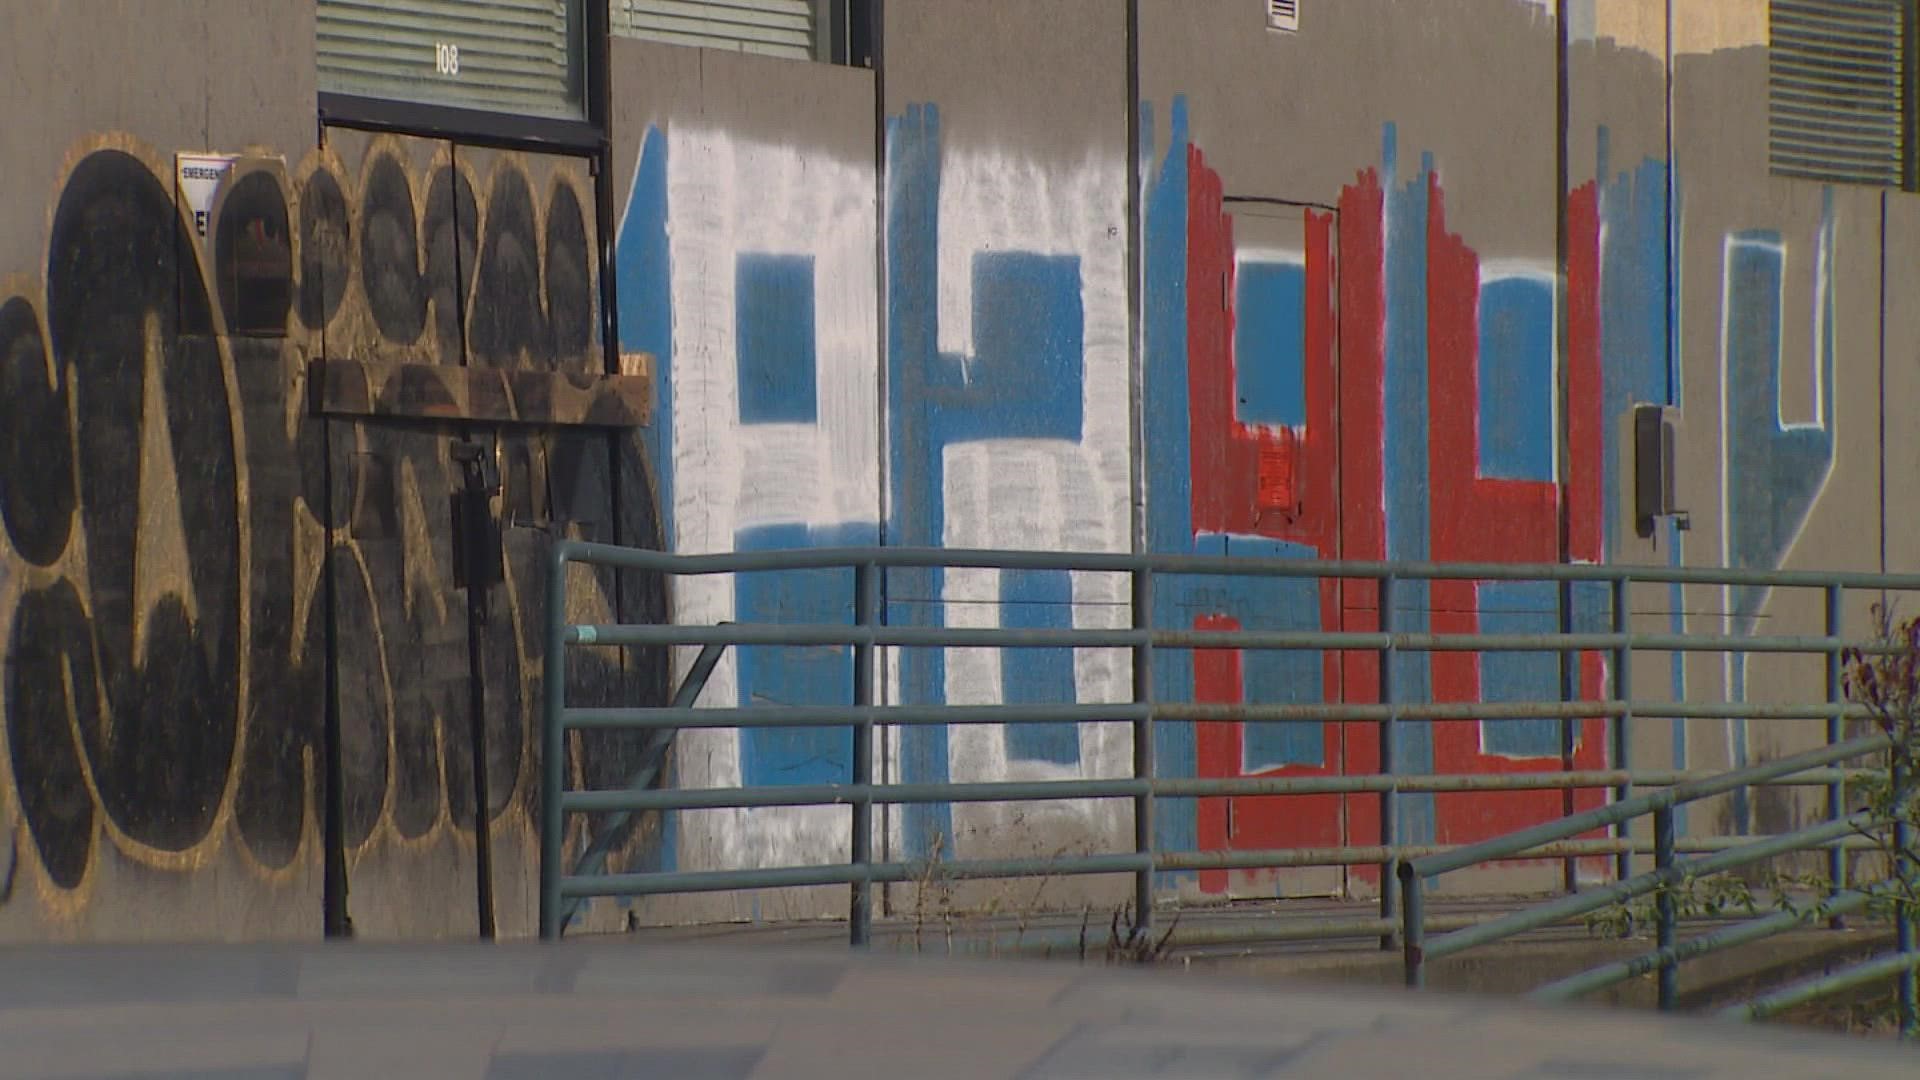 The "One Seattle Graffiti Plan" is intended to help beautify the city and increase enforcement.